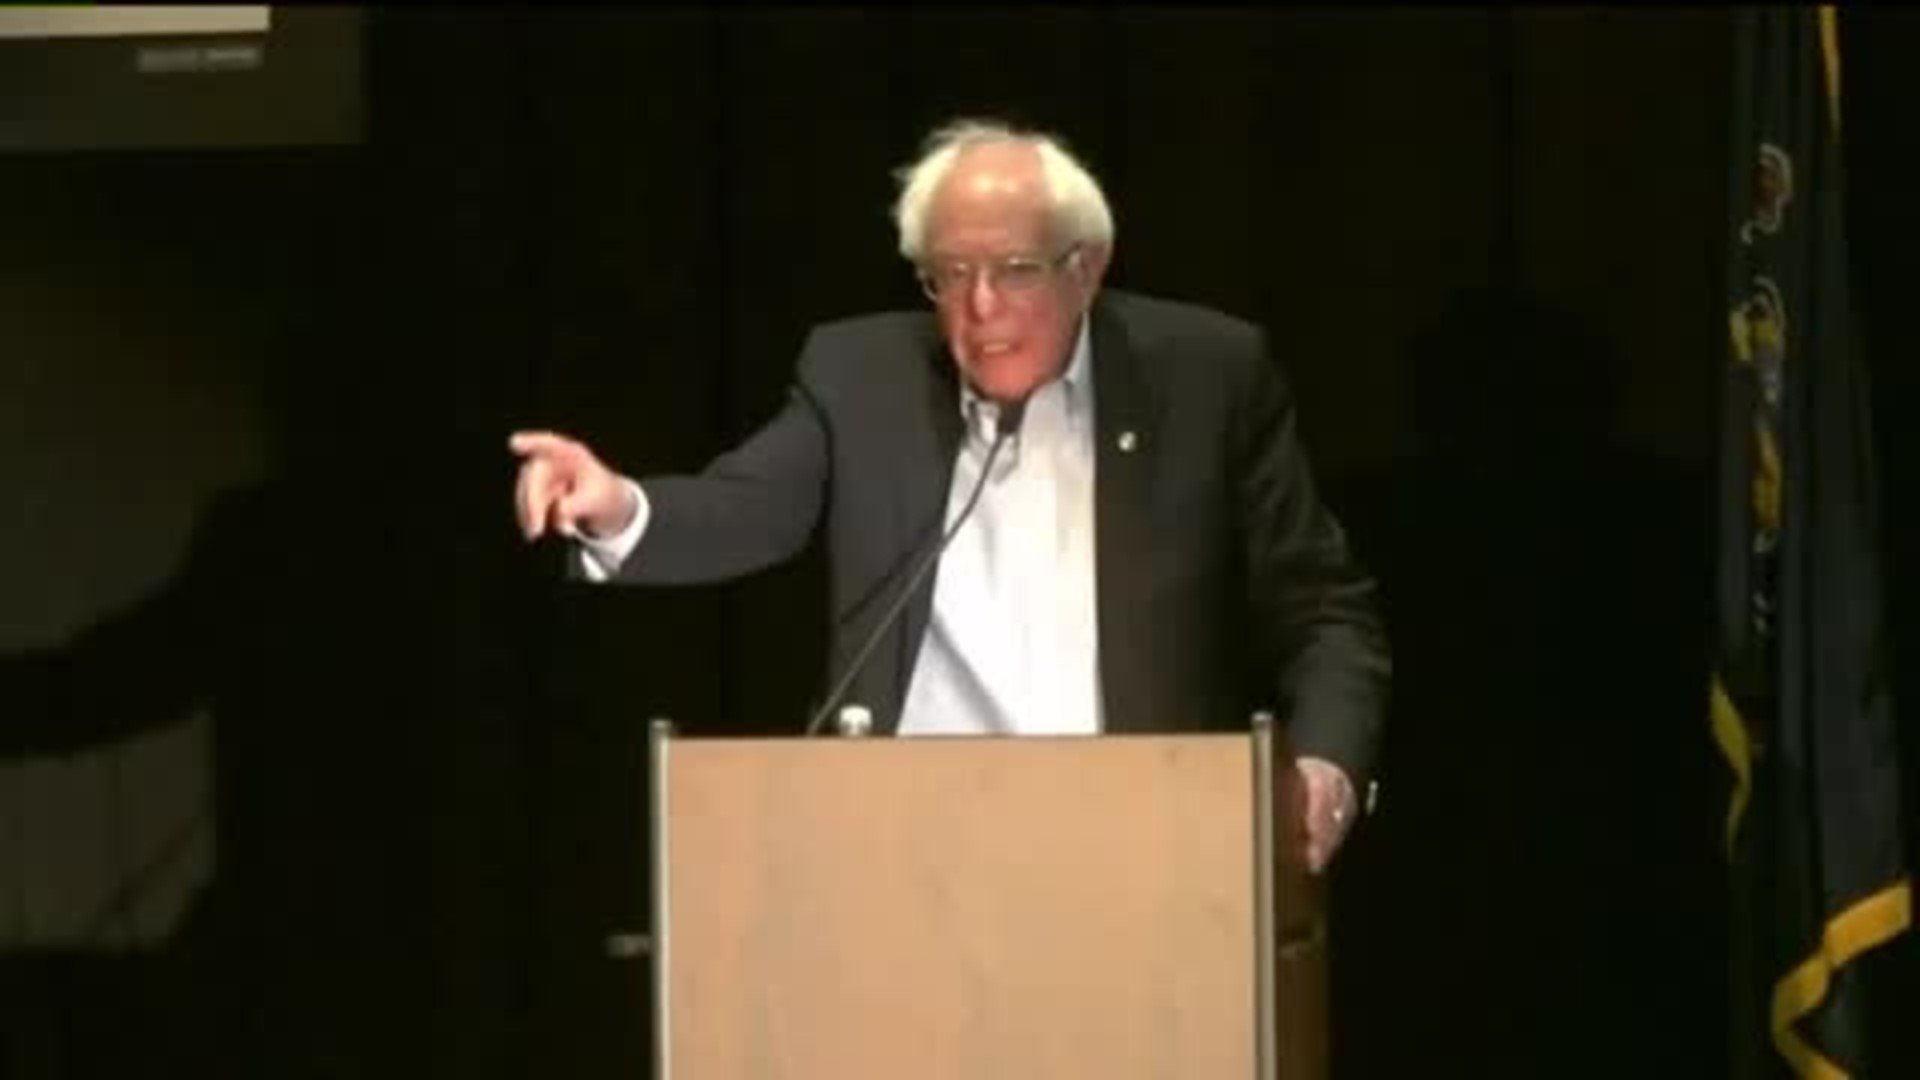 Sanders Makes Campaign Stop in Luzerne County